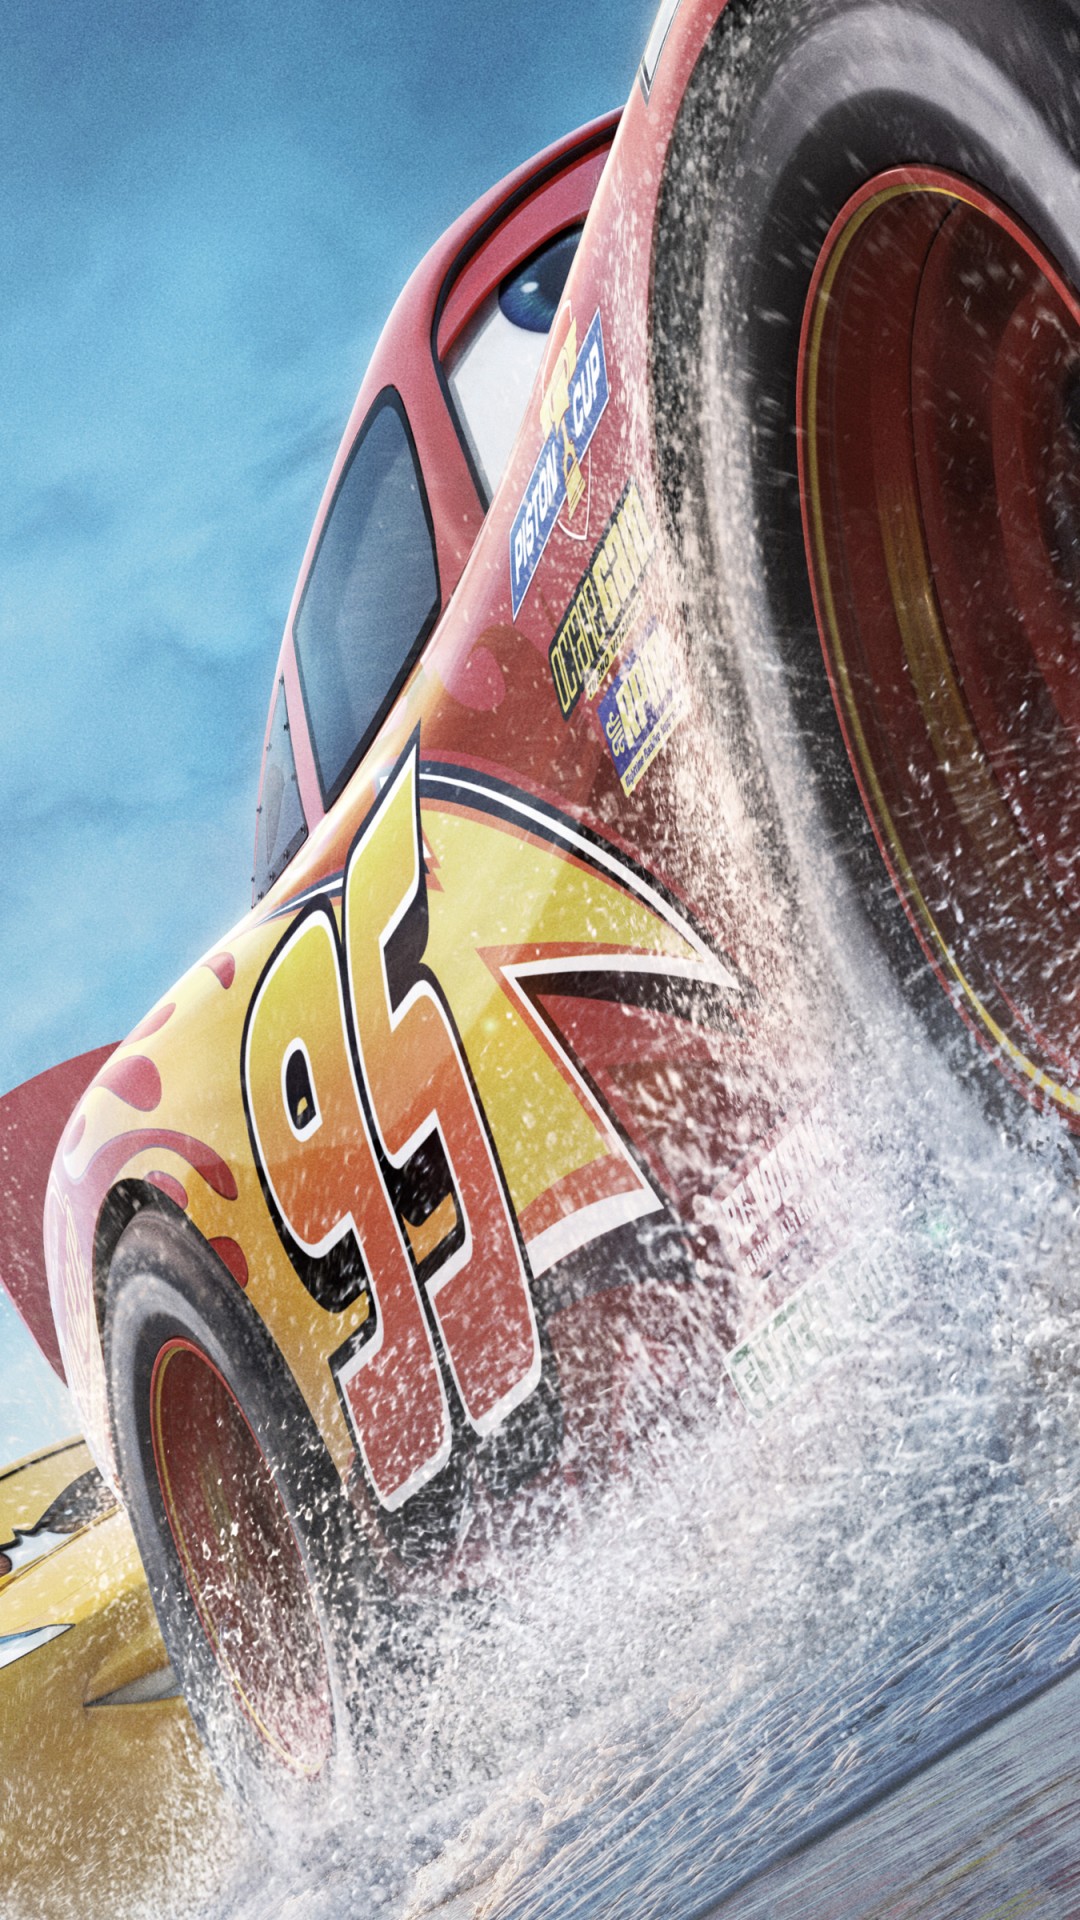 Free Download Cars 3 Pixar Animation Wallpaper for Desktop and Mobiles  iPhone 6 / 6S Plus - HD Wallpaper 